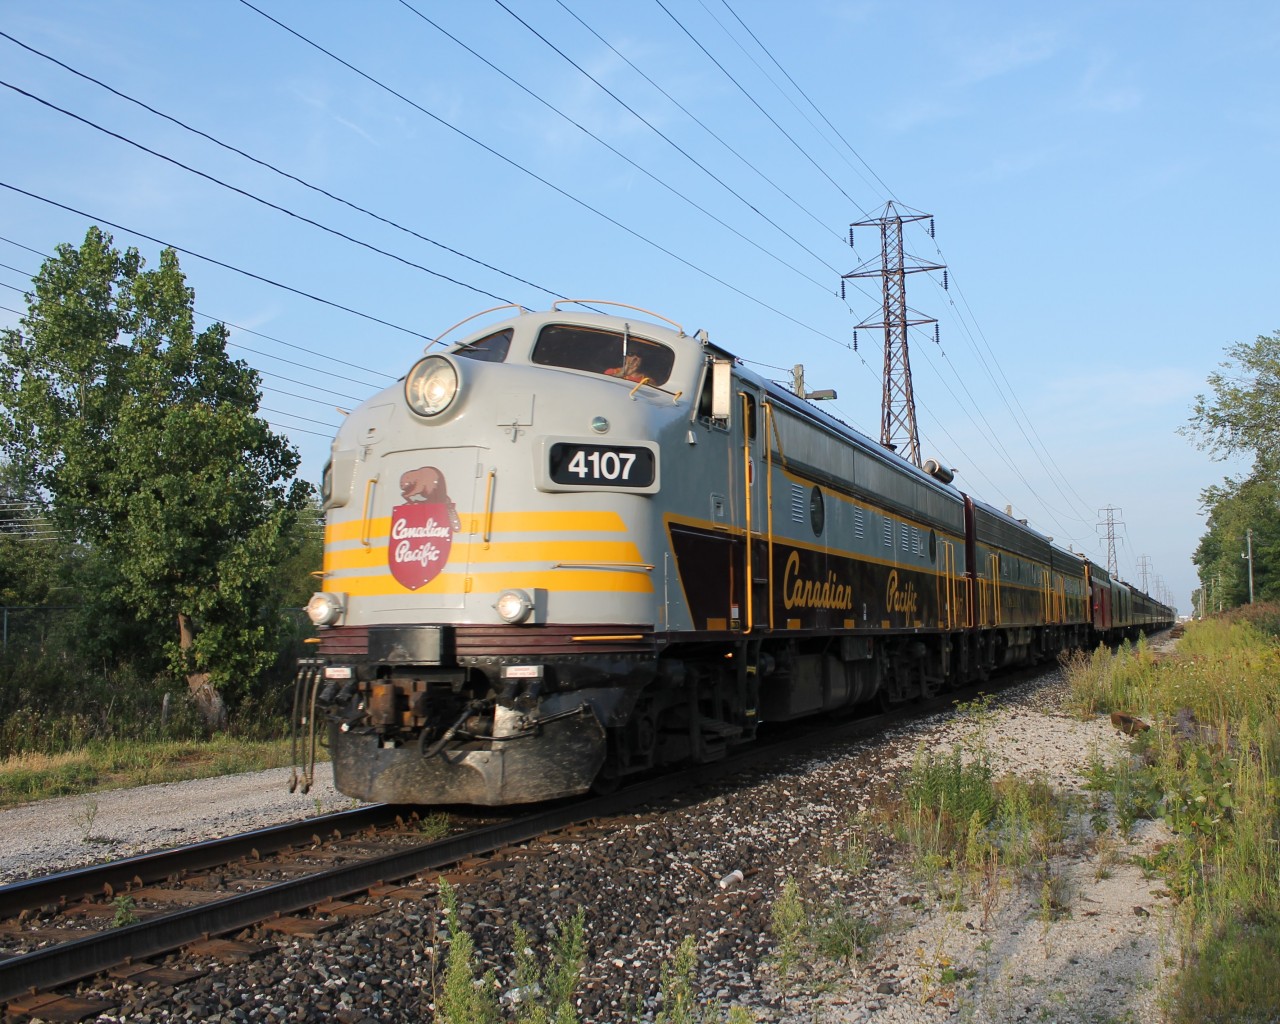 Here's one of my photo's of 40B in Windsor, ON. near Optimist Park. You can see the conductor waving in the window. This was my 2nd time seeing the RCP in Windsor in about 10 years. Last time it came down it had a steam engine on it. Thanks to everyone for the info on the location of the train!